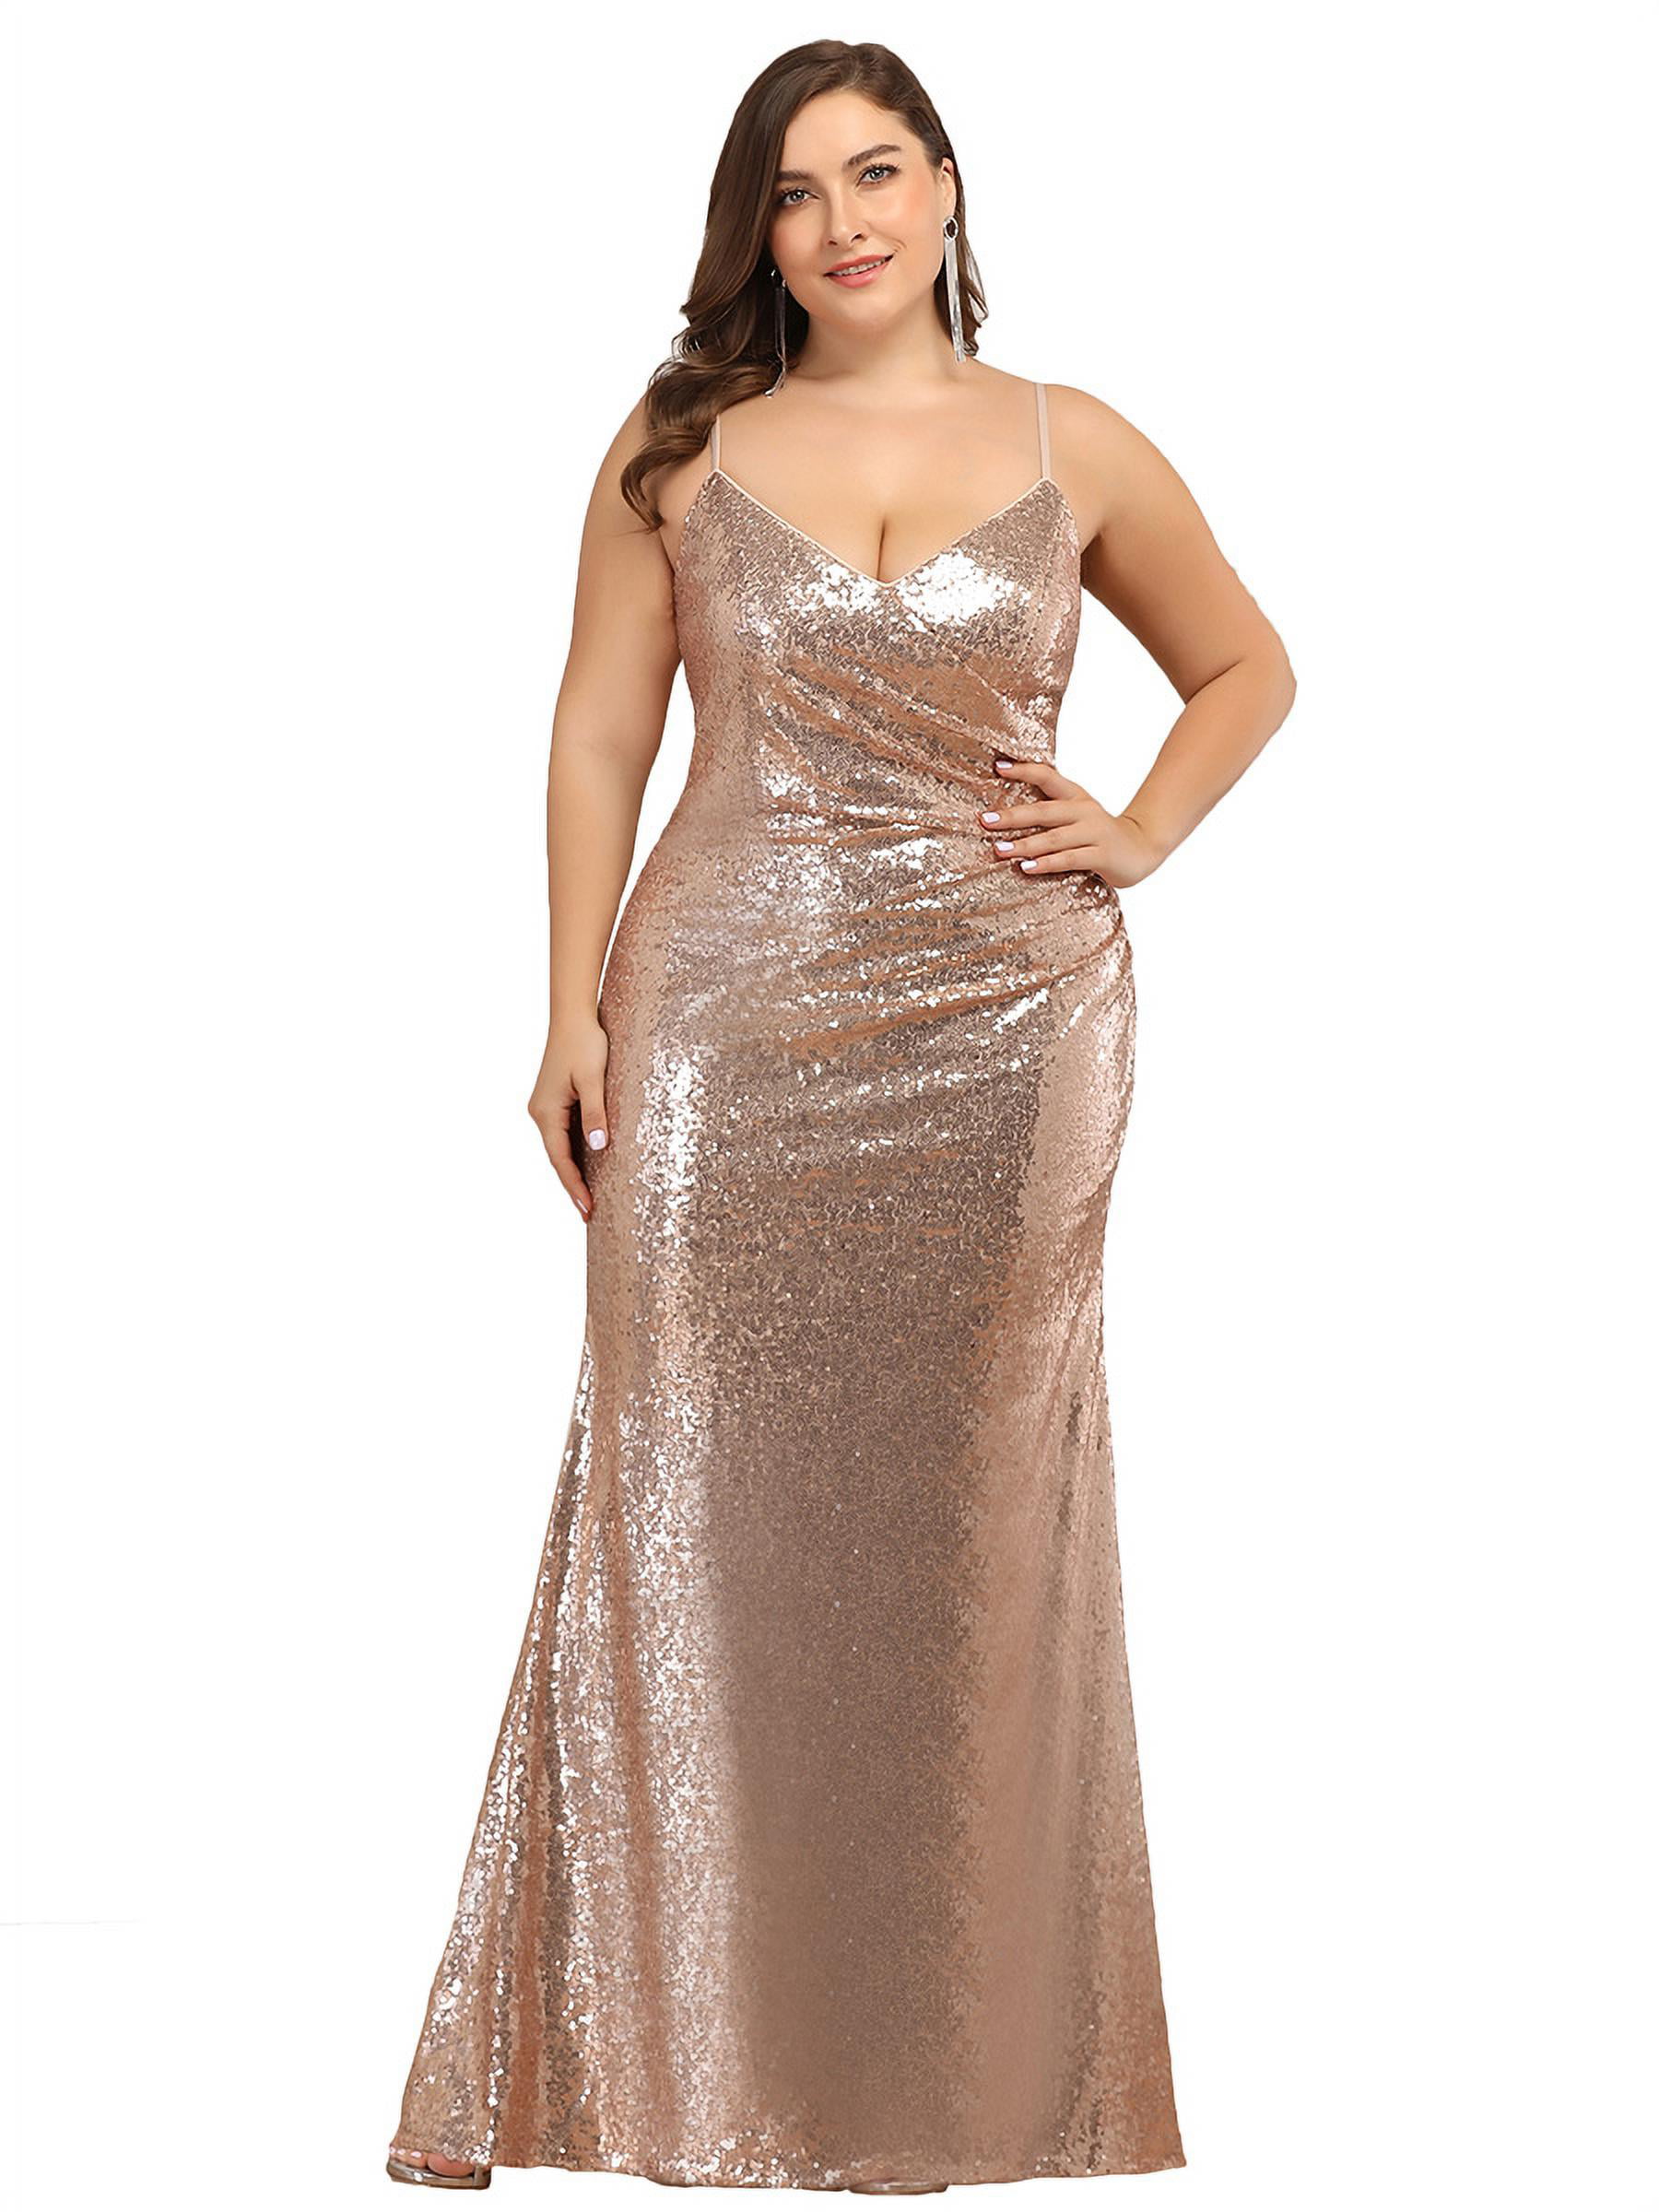 Sequins V Neck Long Formal Bridesmaid Dress Plus Size Evening Party Prom Gown 16 